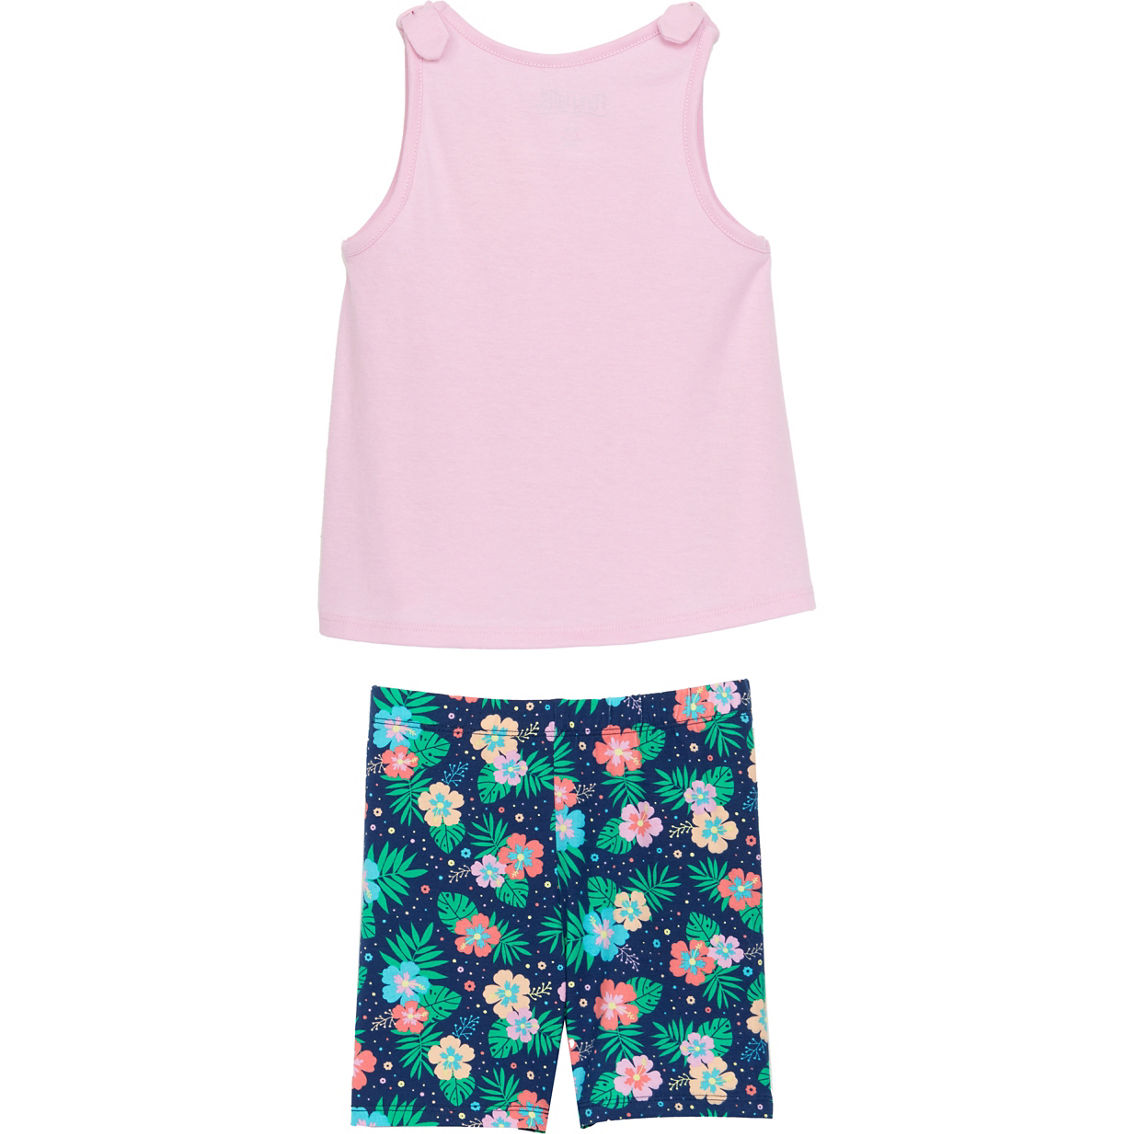 Gumballs Toddler Girls Mist Pink Bow Graphic Tank and Bike Shorts 2 pc. Set - Image 2 of 2